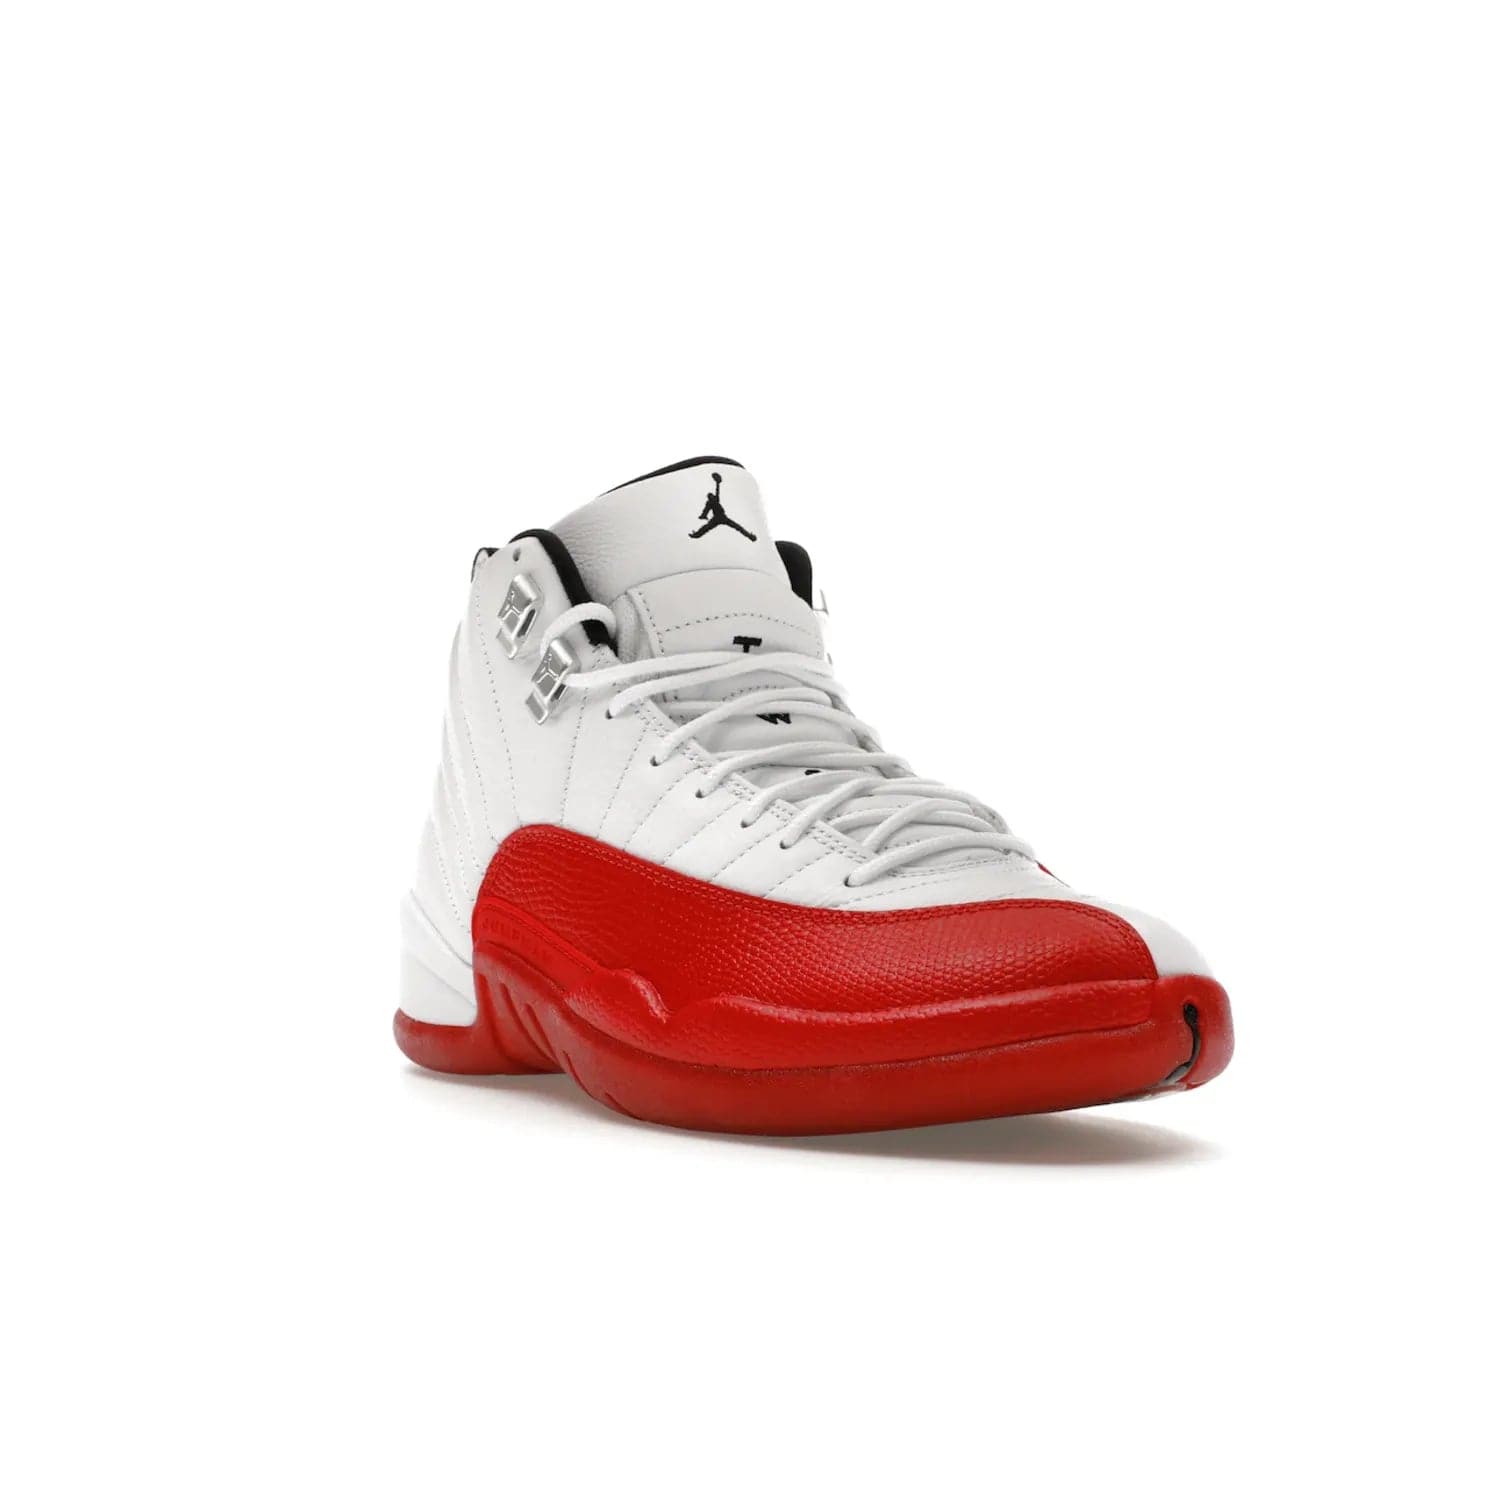 Jordan 12 Retro Cherry (2023) - Image 6 - Only at www.BallersClubKickz.com - Live your sneaker legend with the Jordan 12 Retro Cherry. Iconic pebbled leather mudguards, quilted uppers, and varsity red accents make this 1997 classic a must-have for 2023. Shine on with silver hardware and matching midsoles, and bring it all together for limited-edition style on October 28th. Step into Jordan legacy with the Retro Cherry.